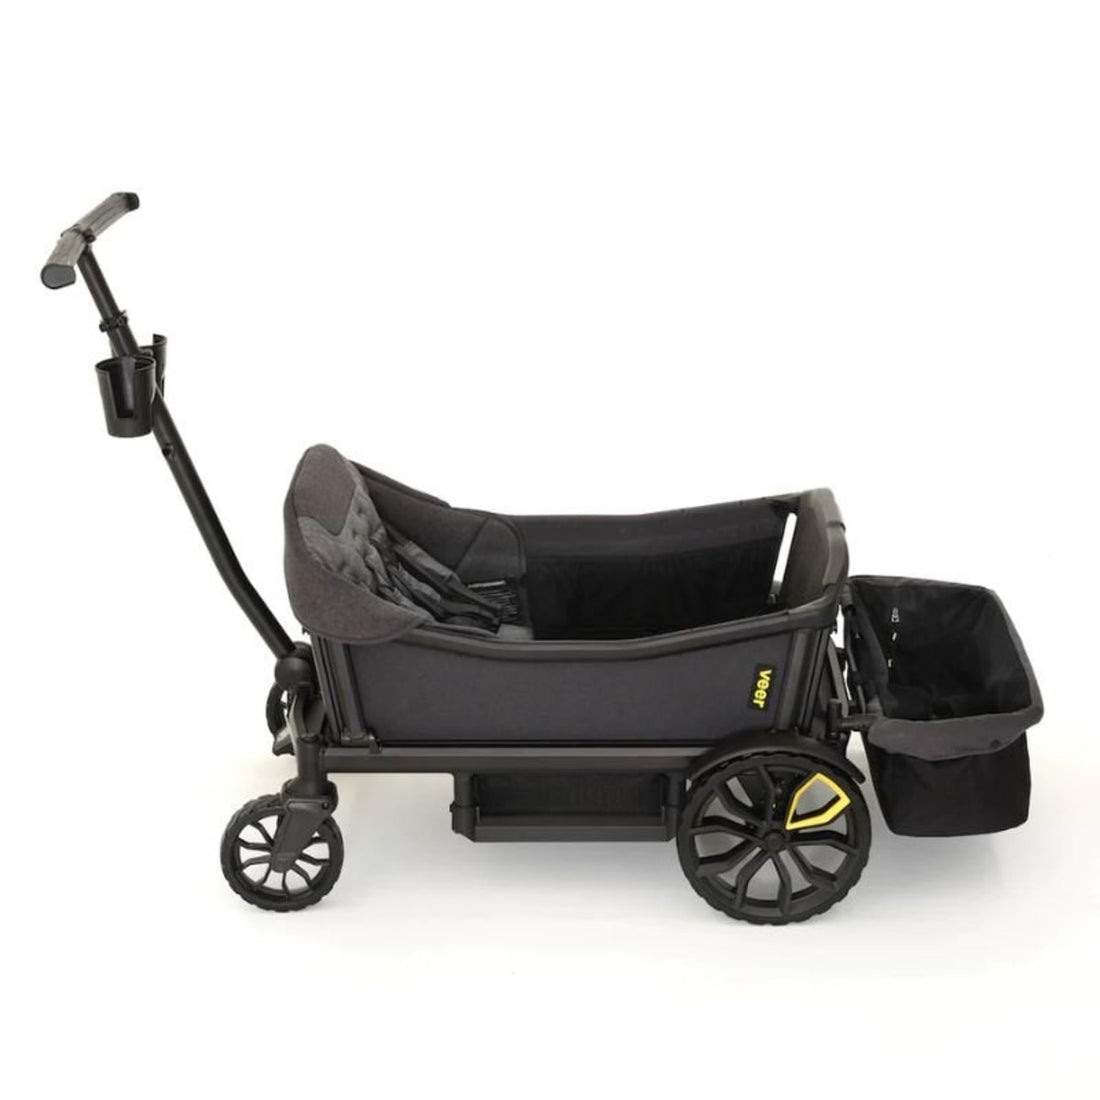 Cruiser XL Comfort Seat for Toddlers